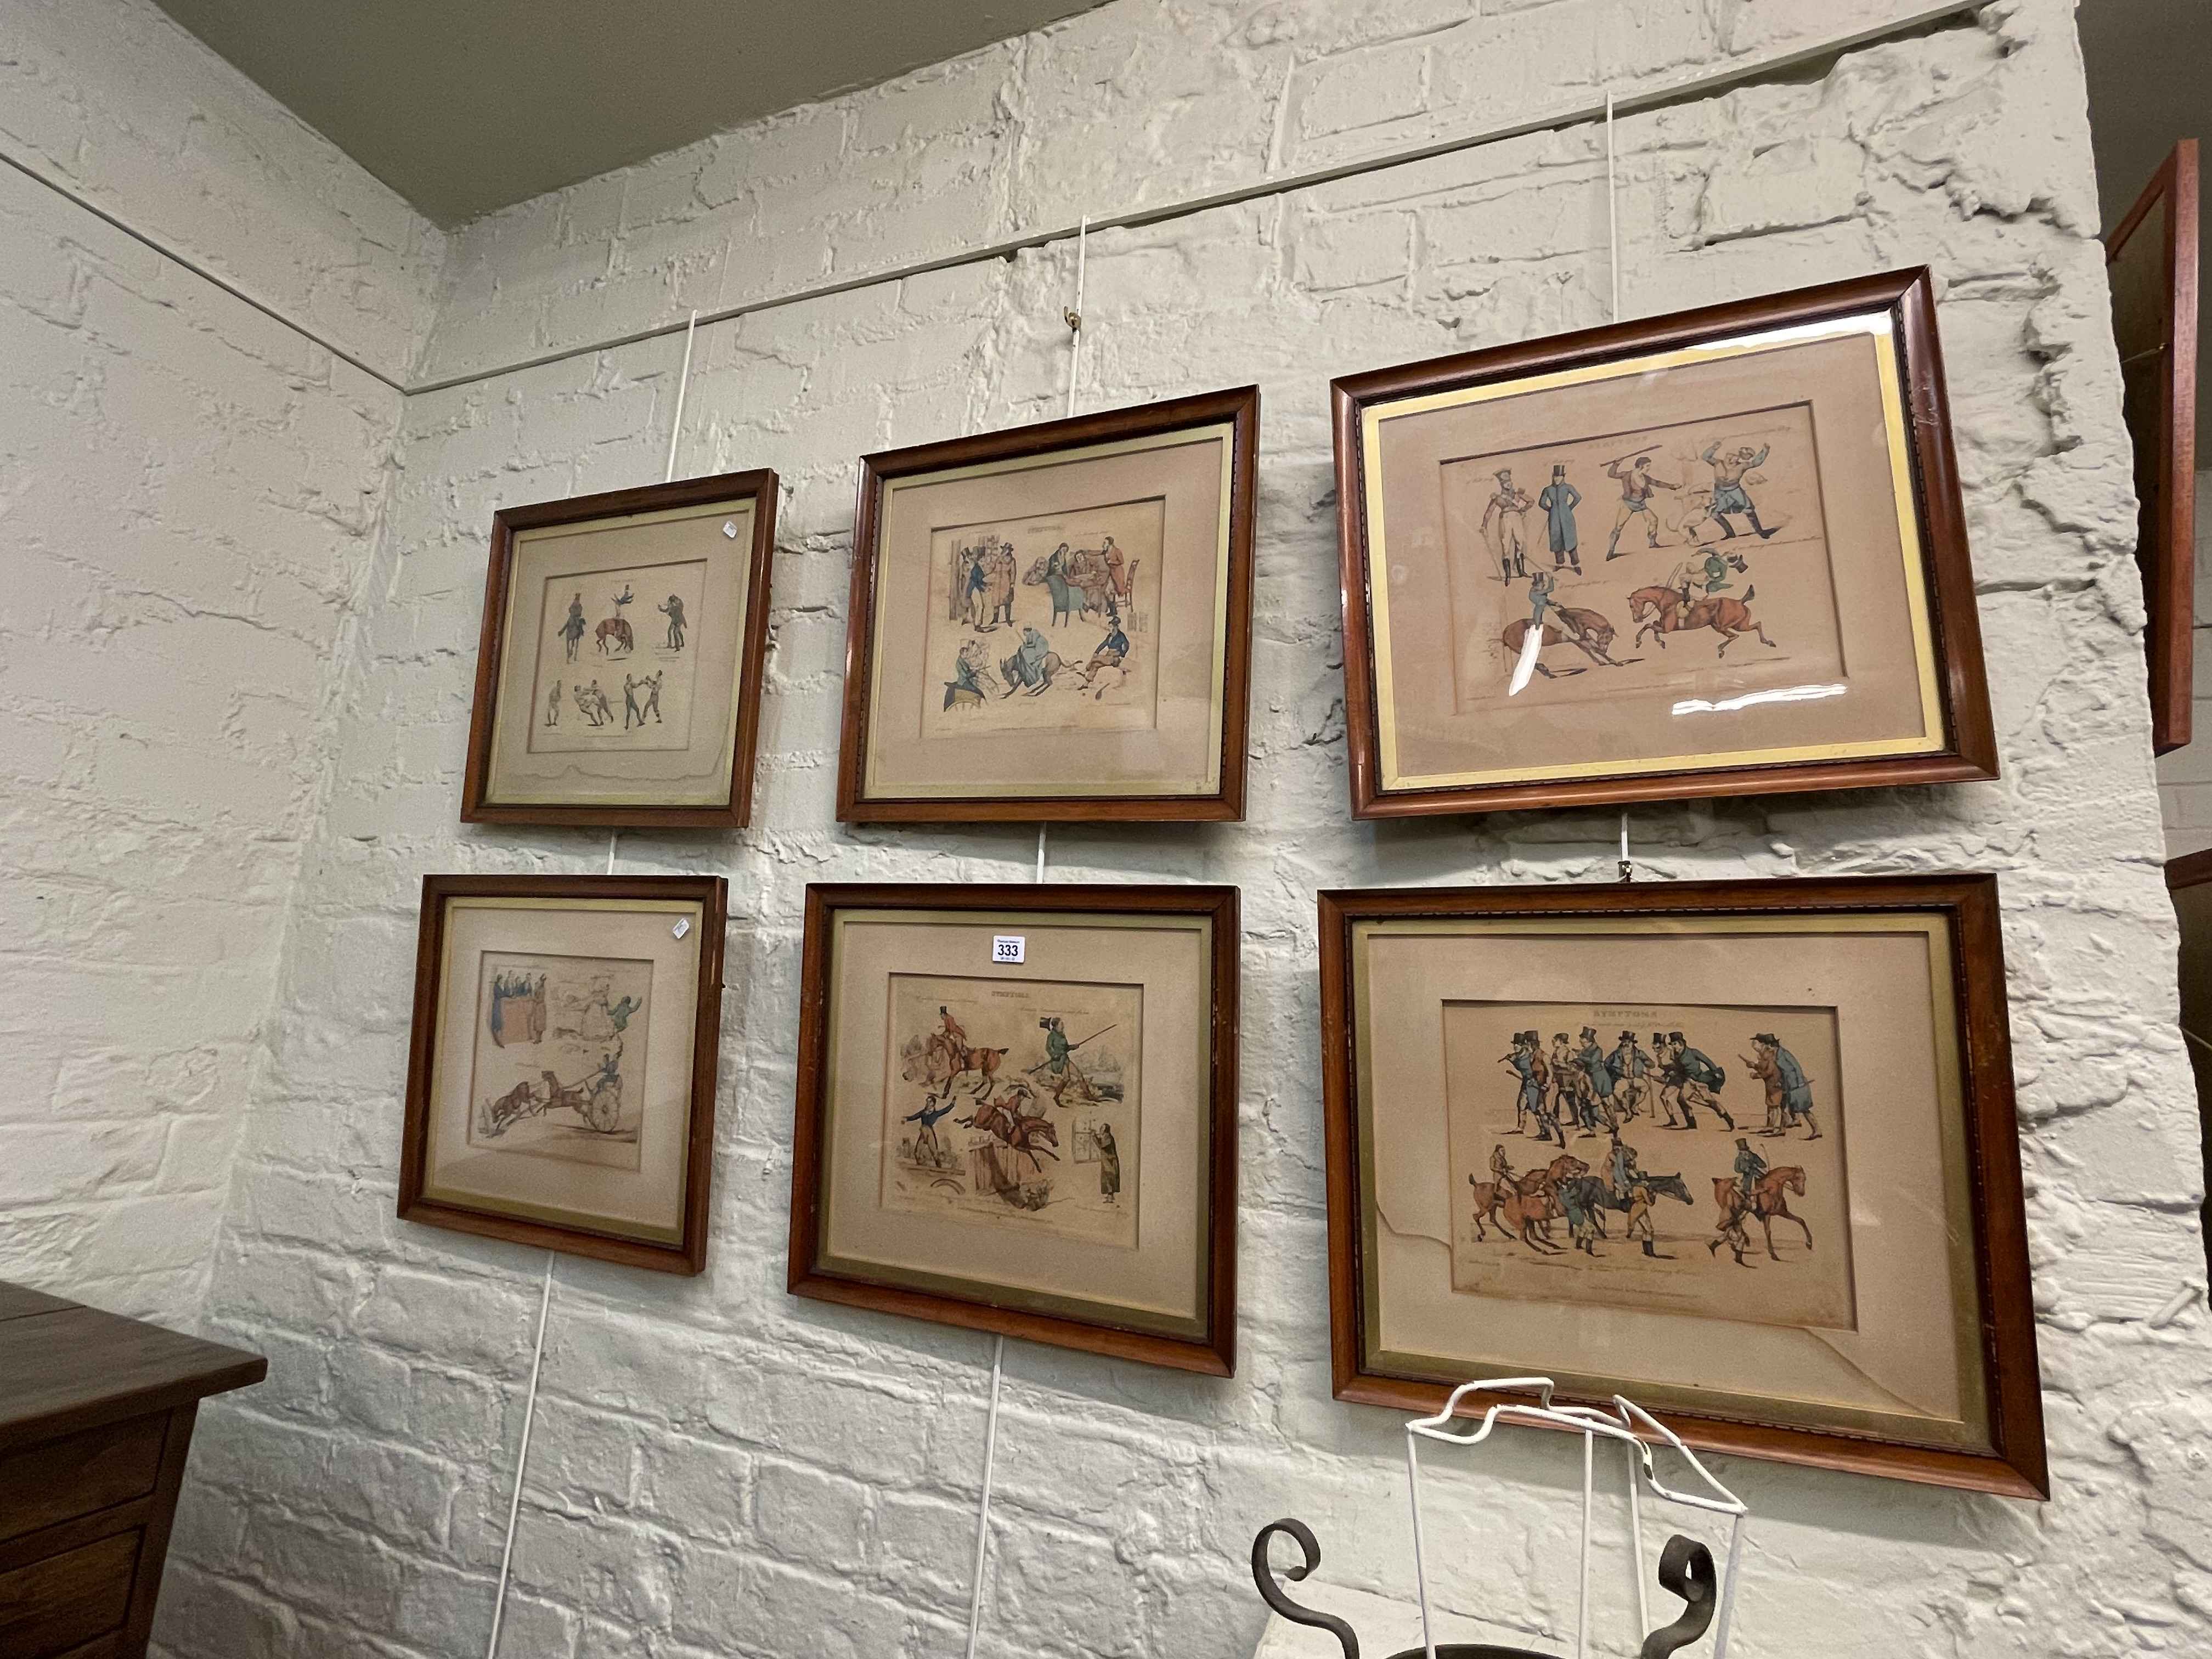 After H. Alken, six small framed humorous prints.